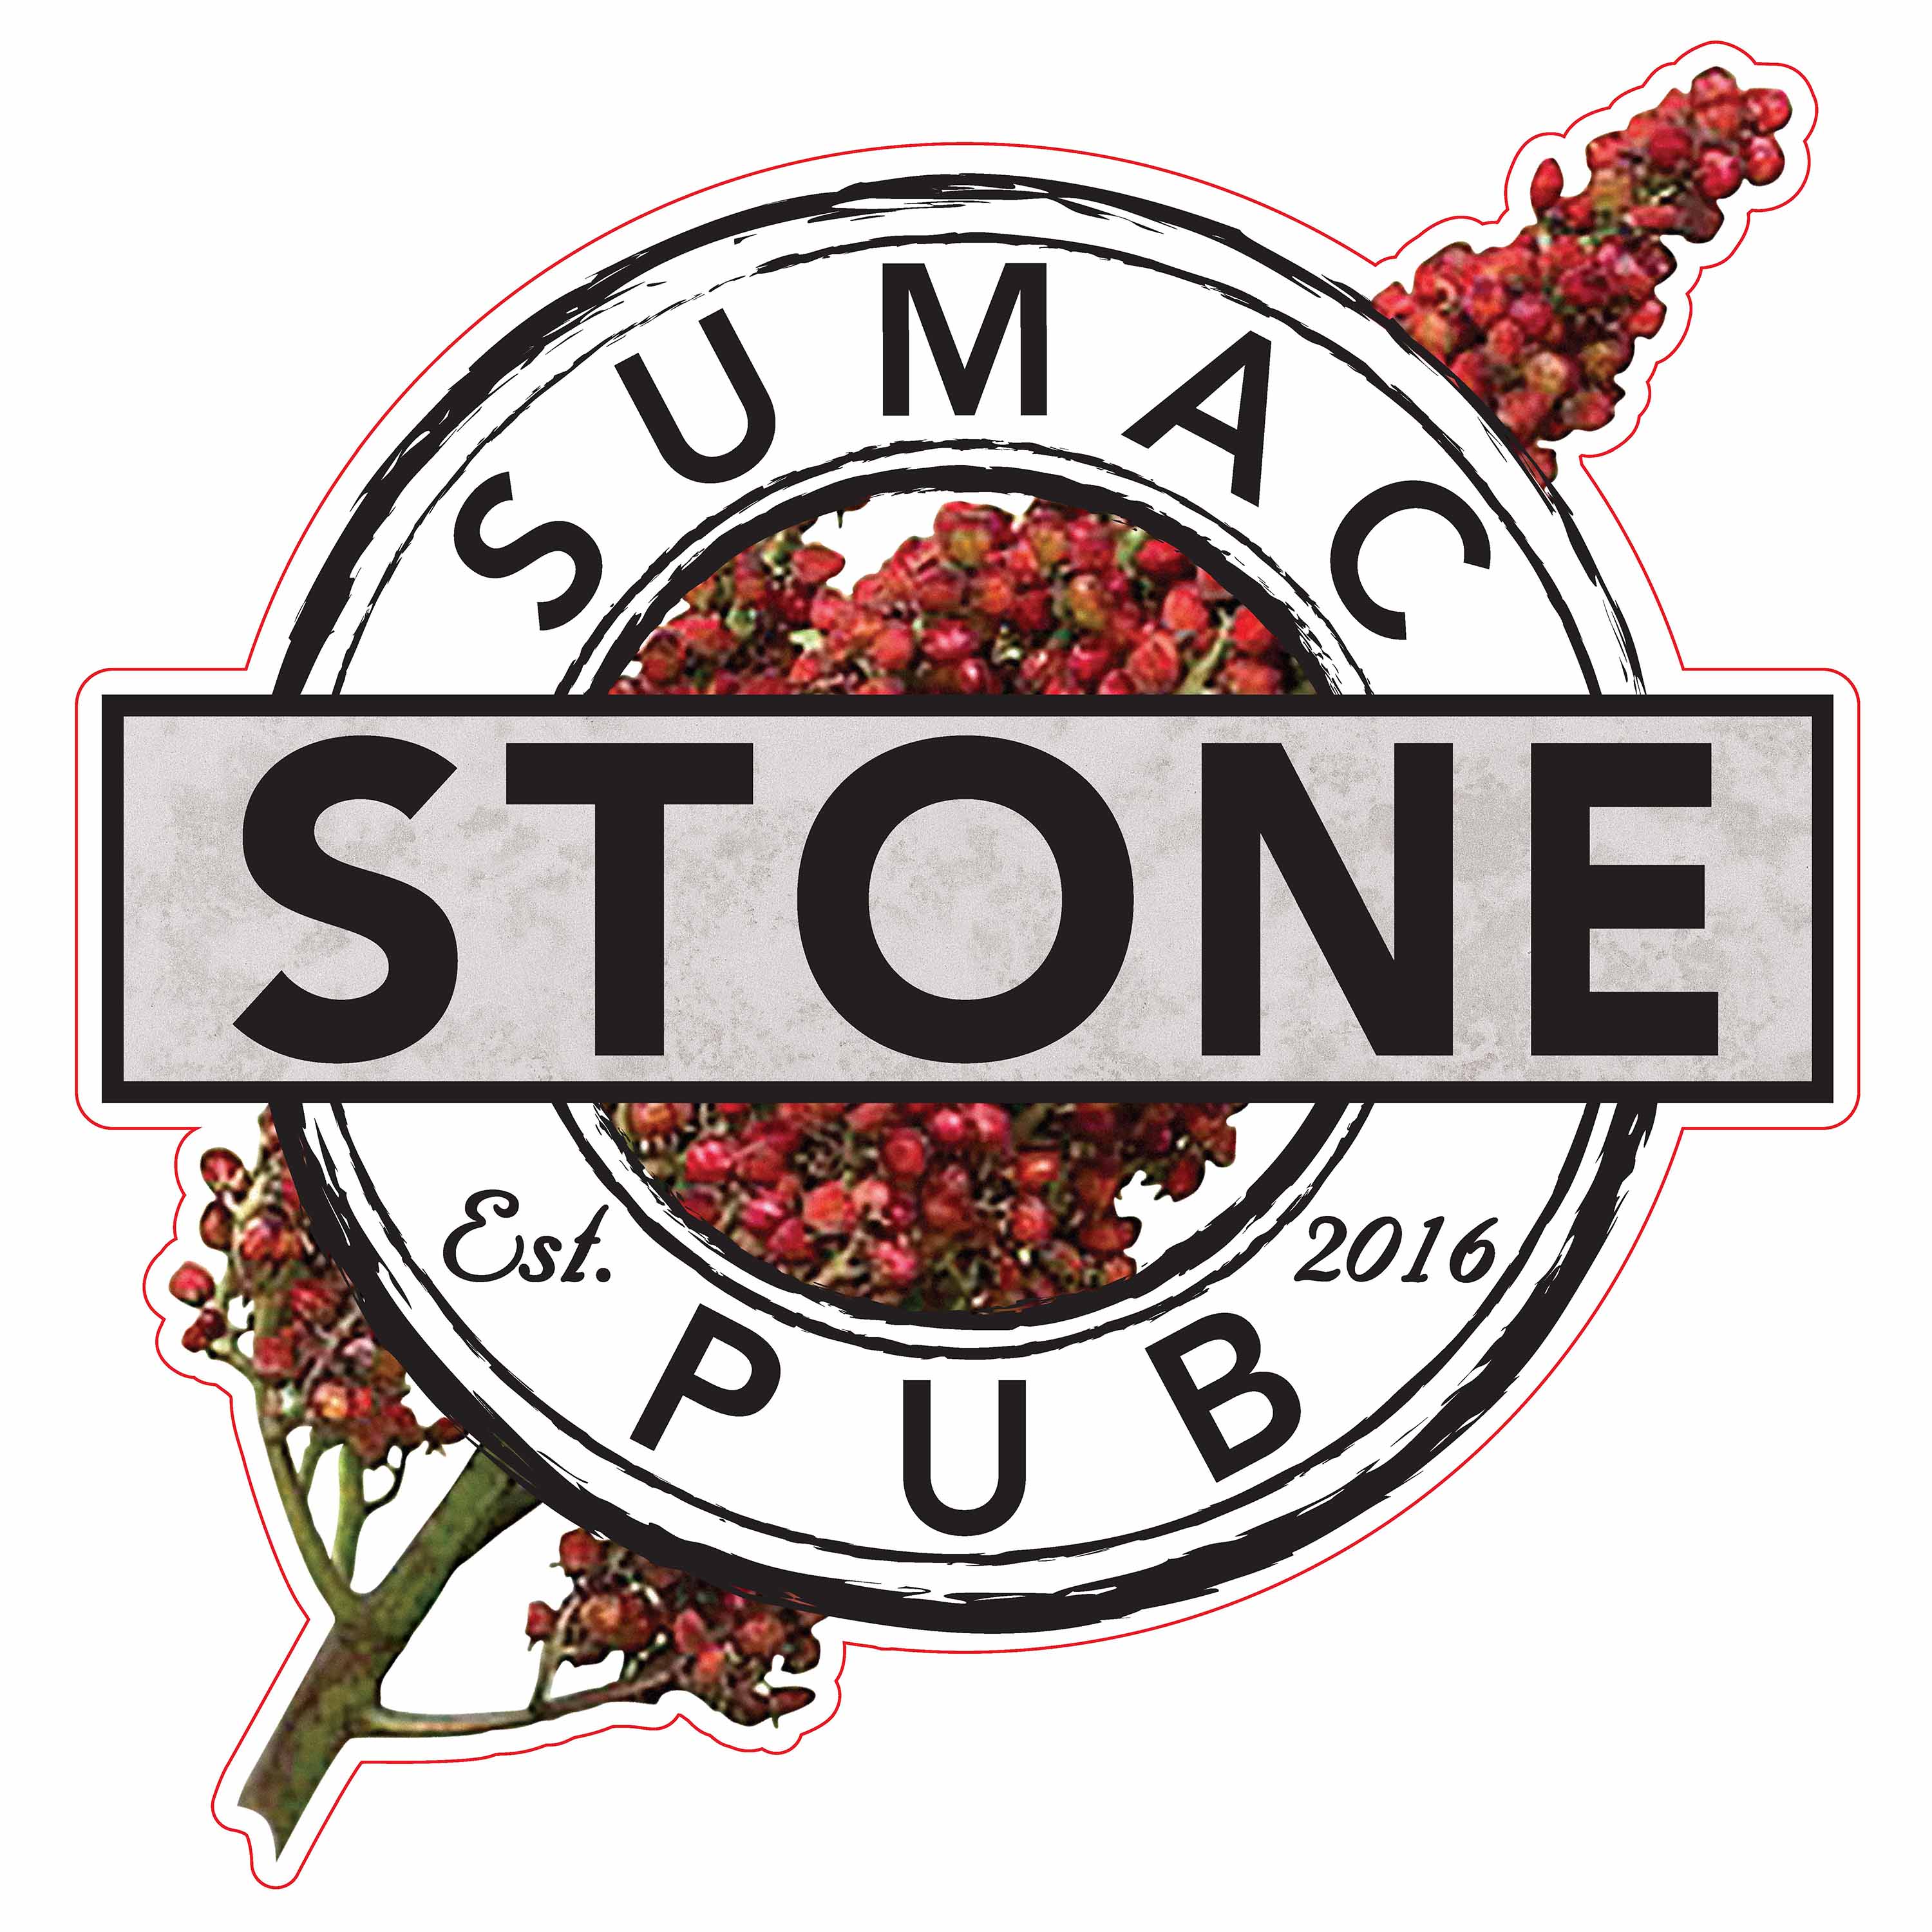 Image of a created dieline Boneck did for a sumac stone pub